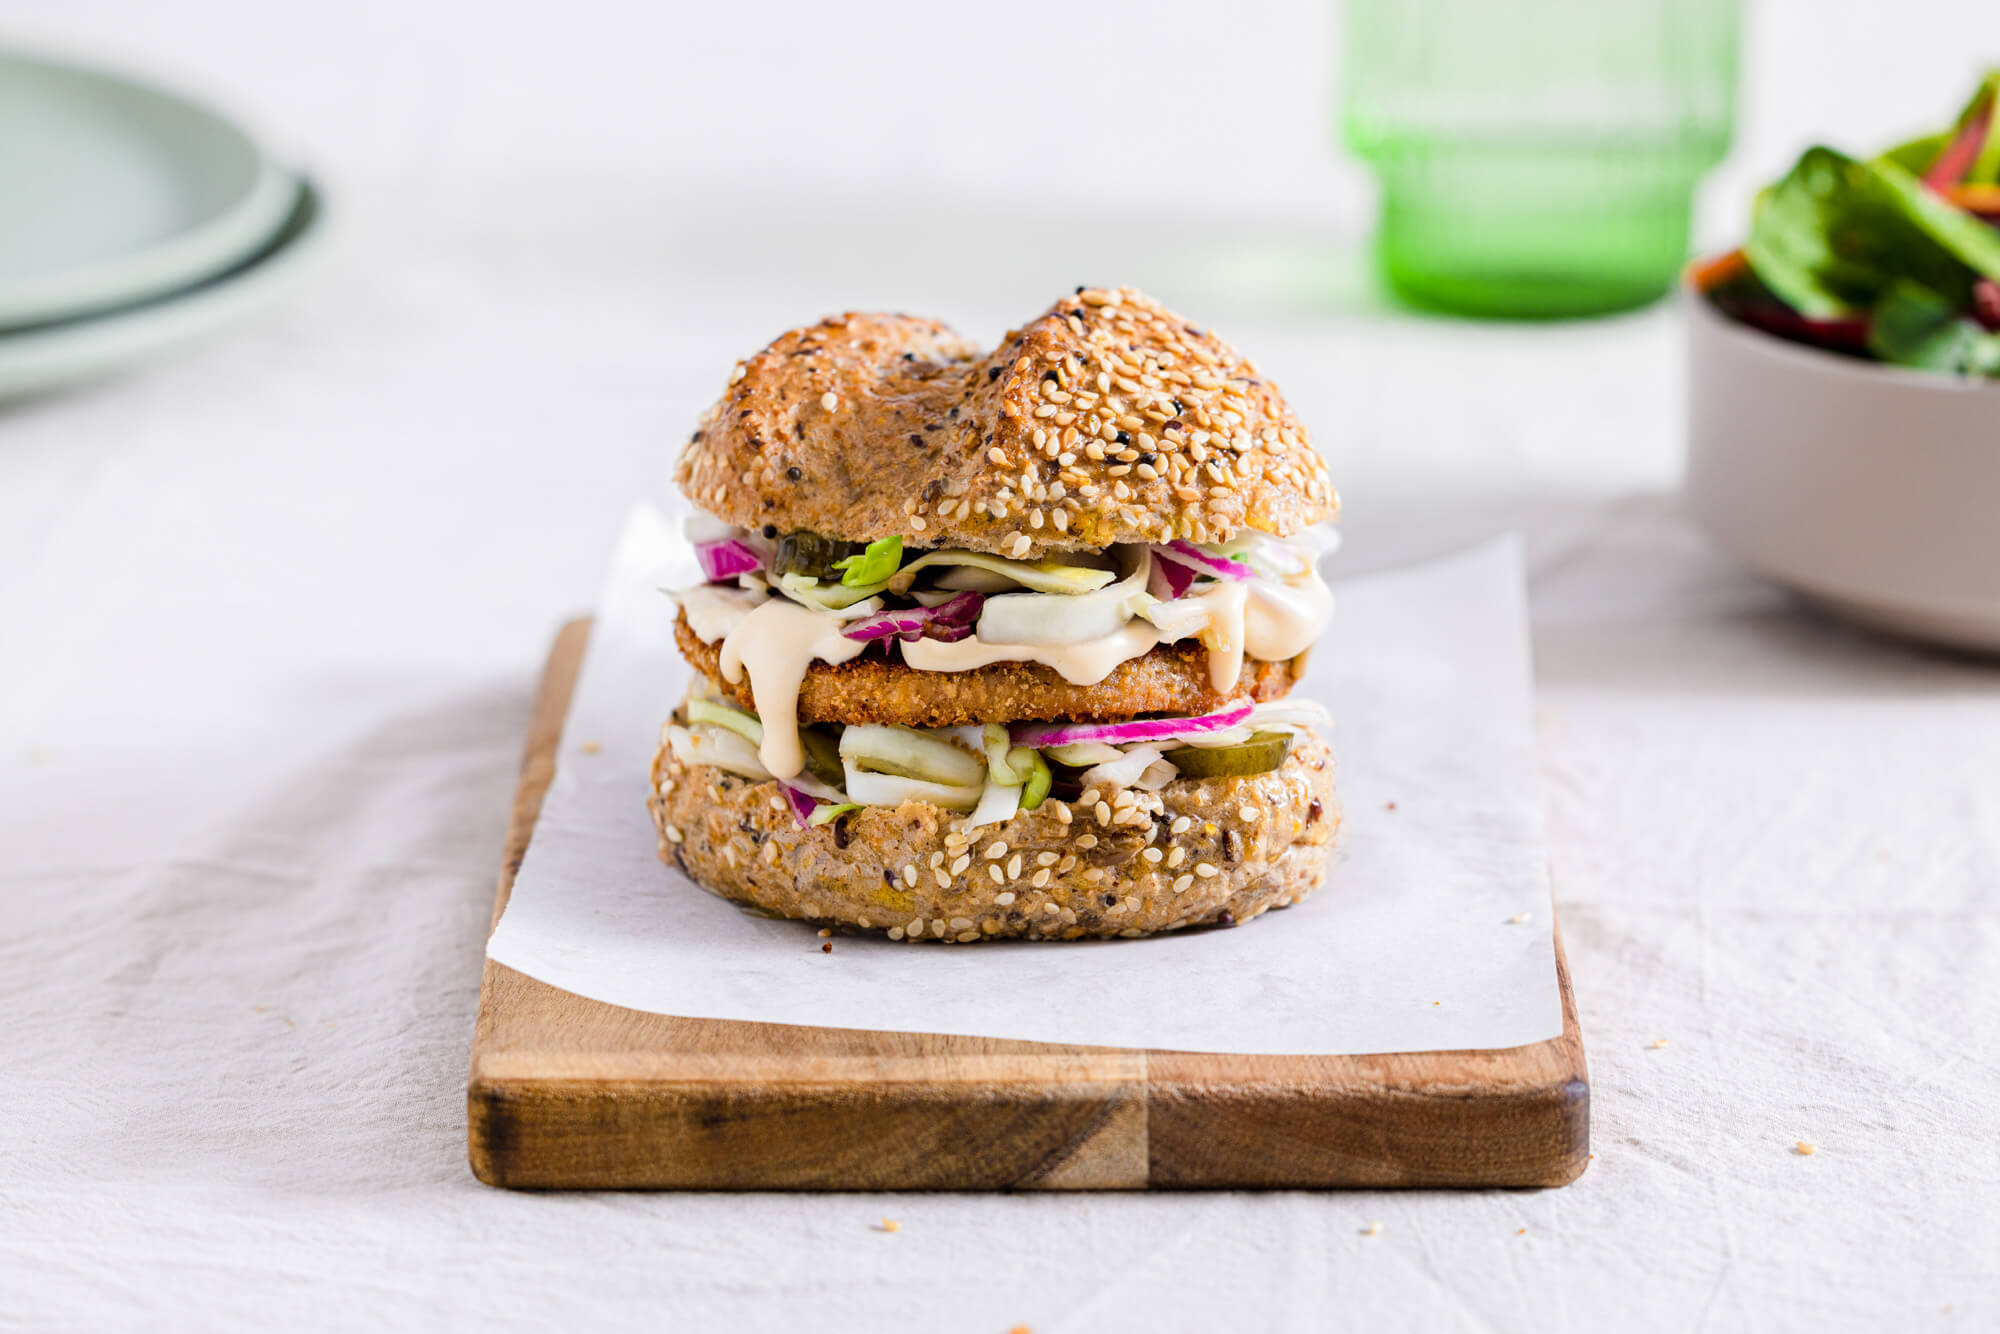 Chicken-Style Burger with Slaw